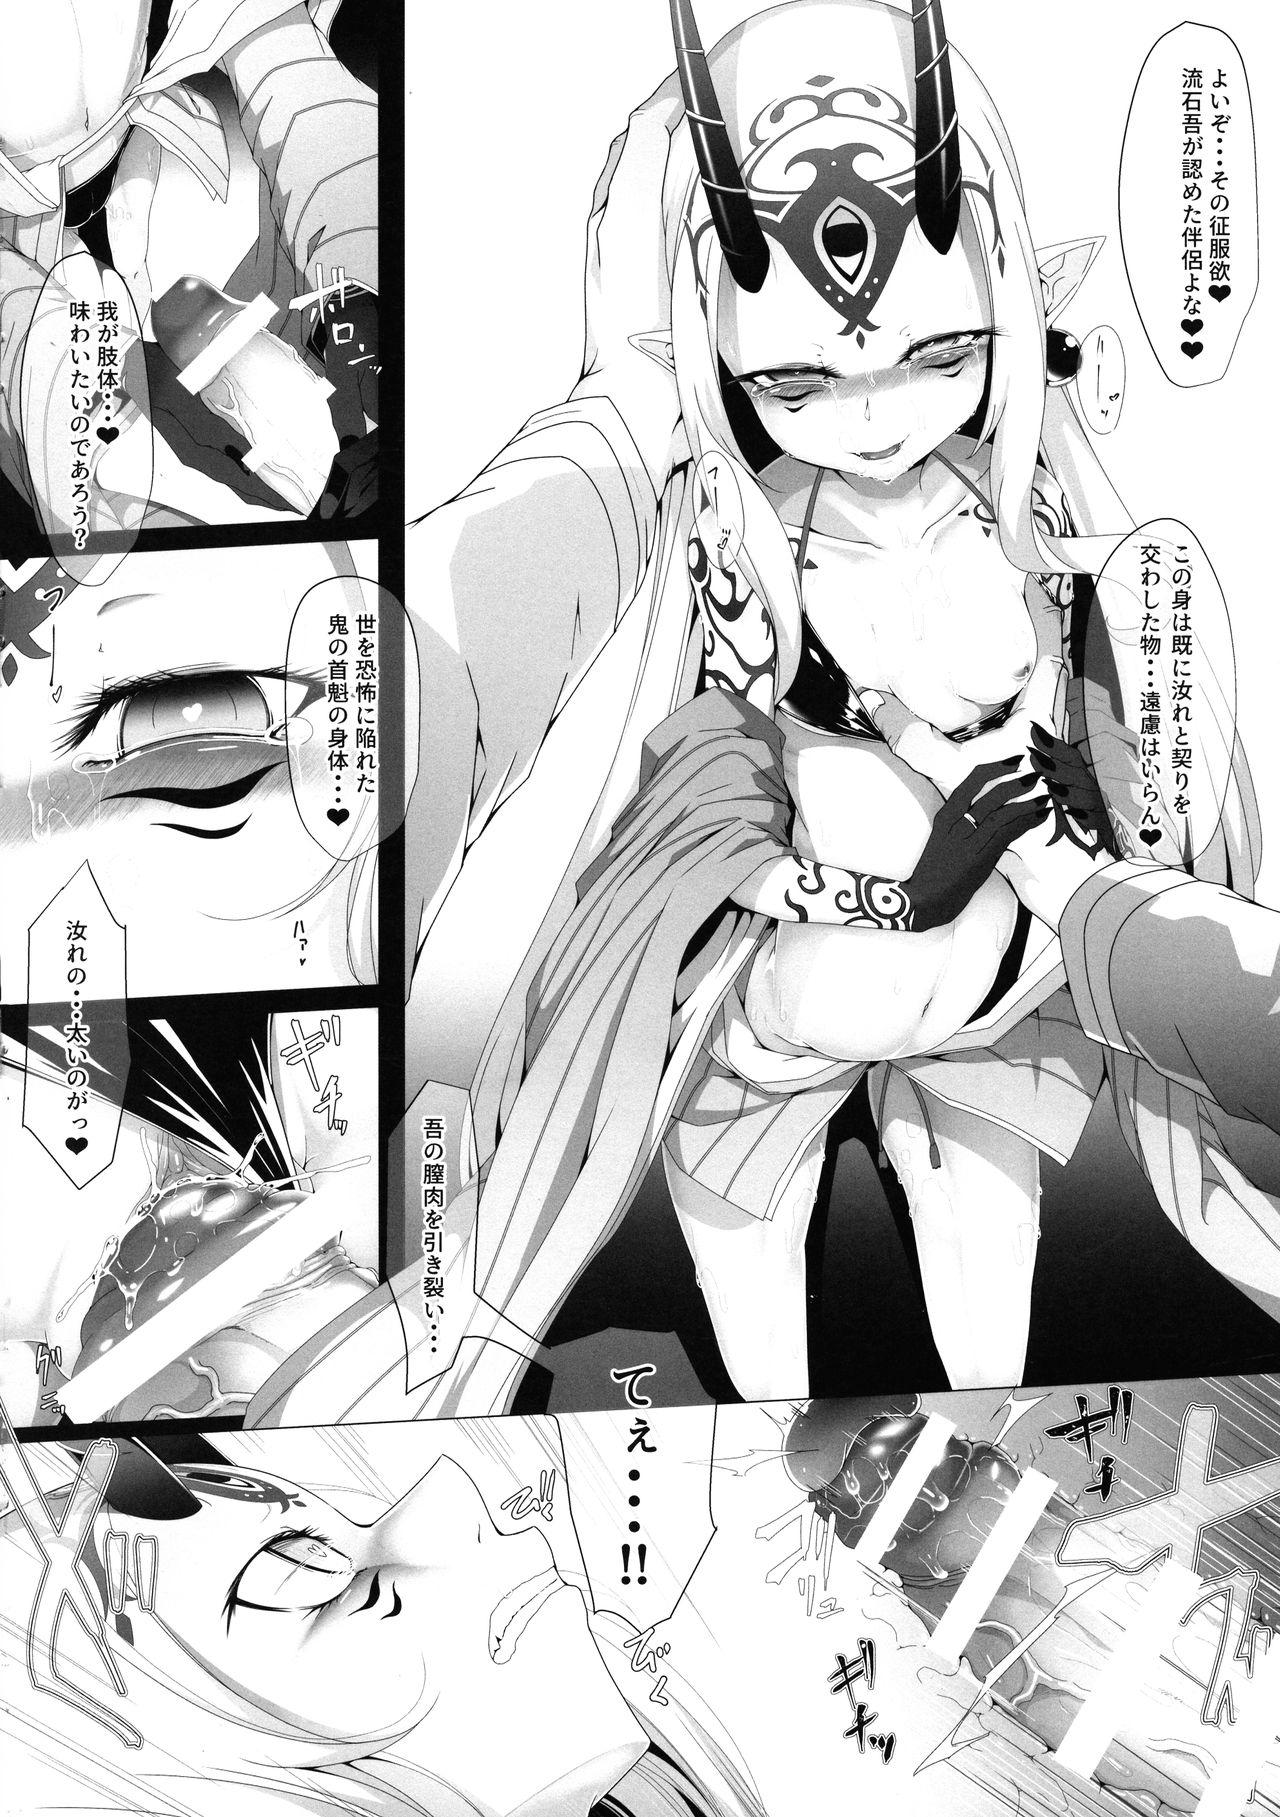 Girls Getting Fucked M.P. Vol. 20 - Fate grand order Sapphic Erotica - Page 6